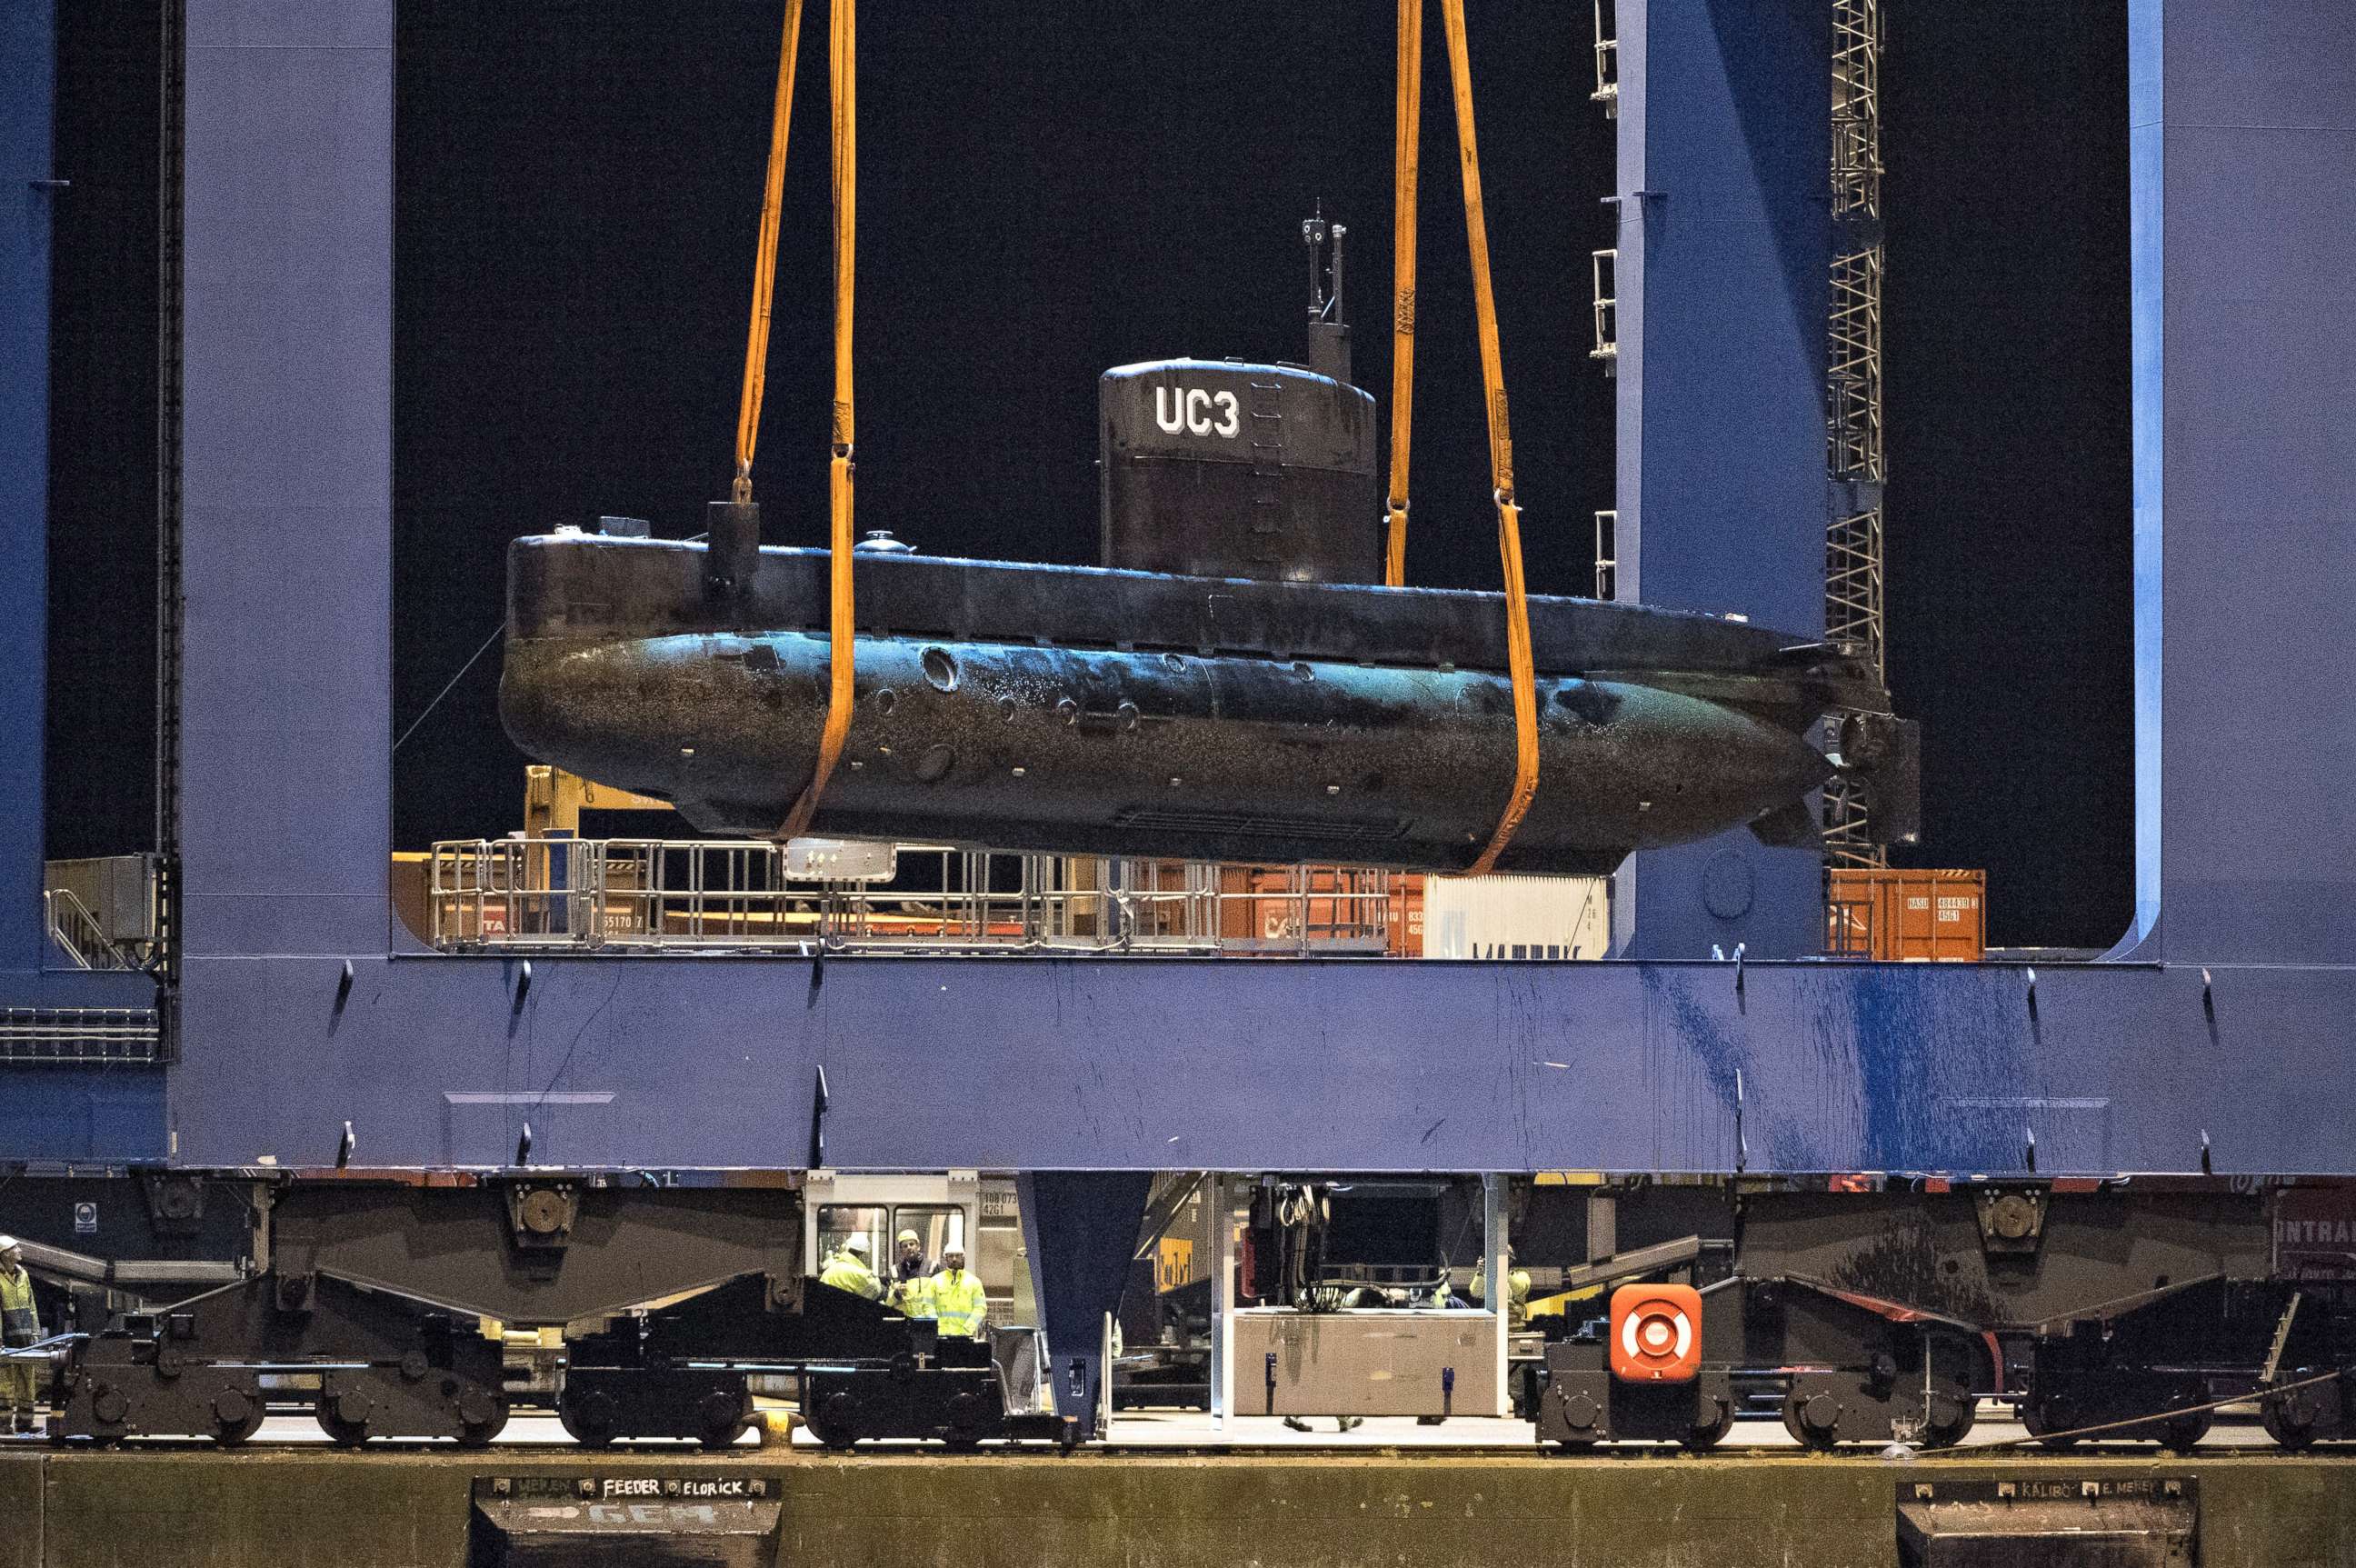 PHOTO: The submarine UC3 Nautilus is lifted onto a block truck from the salvage ship Vina with the help of a container crane in Copenhagen's Harbor, Denmark,August 12, 2013.